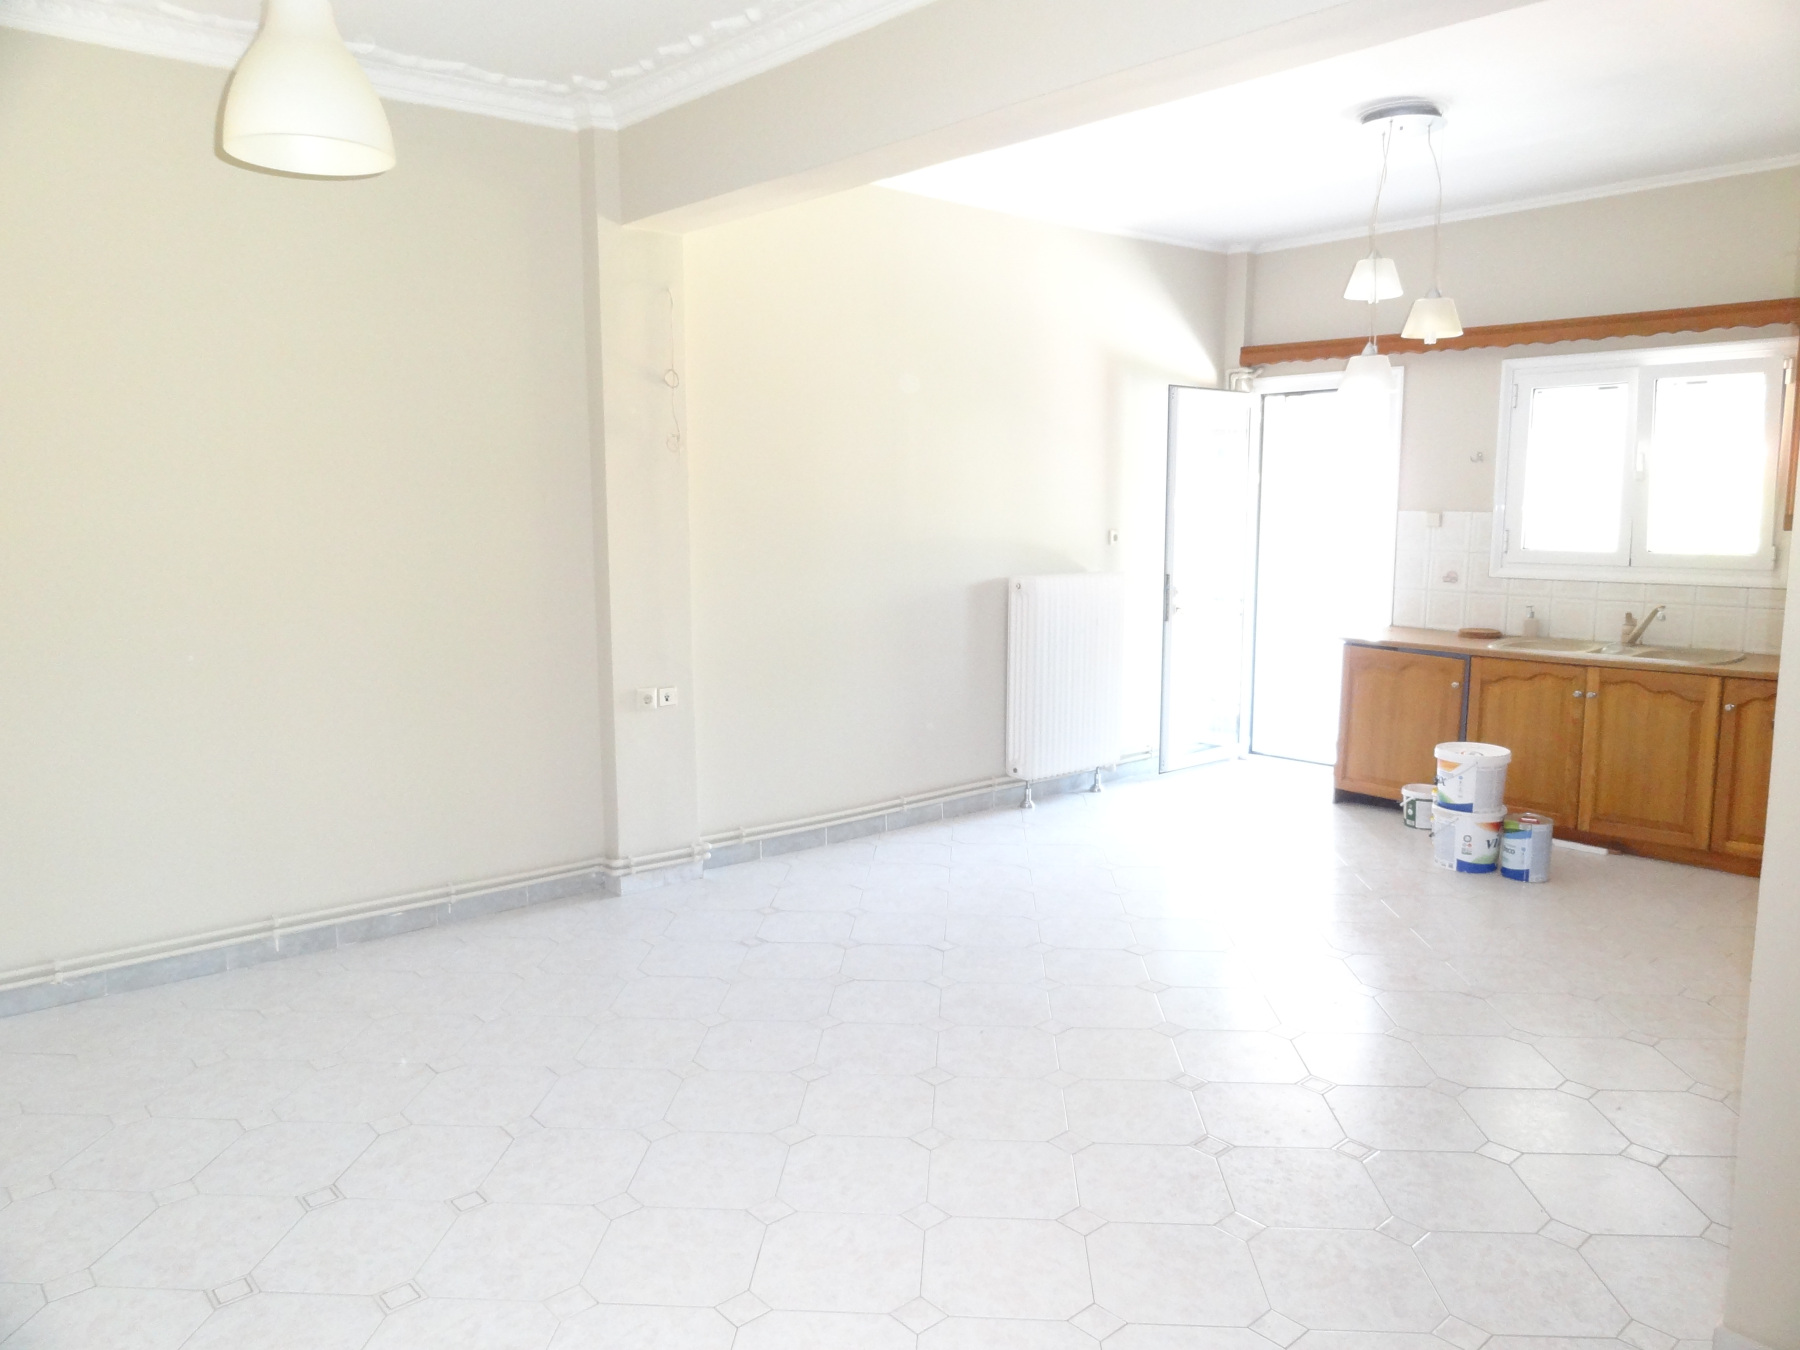 For rent bright 2 bedrooms apartment 65 sq.m. 1st floor for students in the area of Kiafa in Ioannina